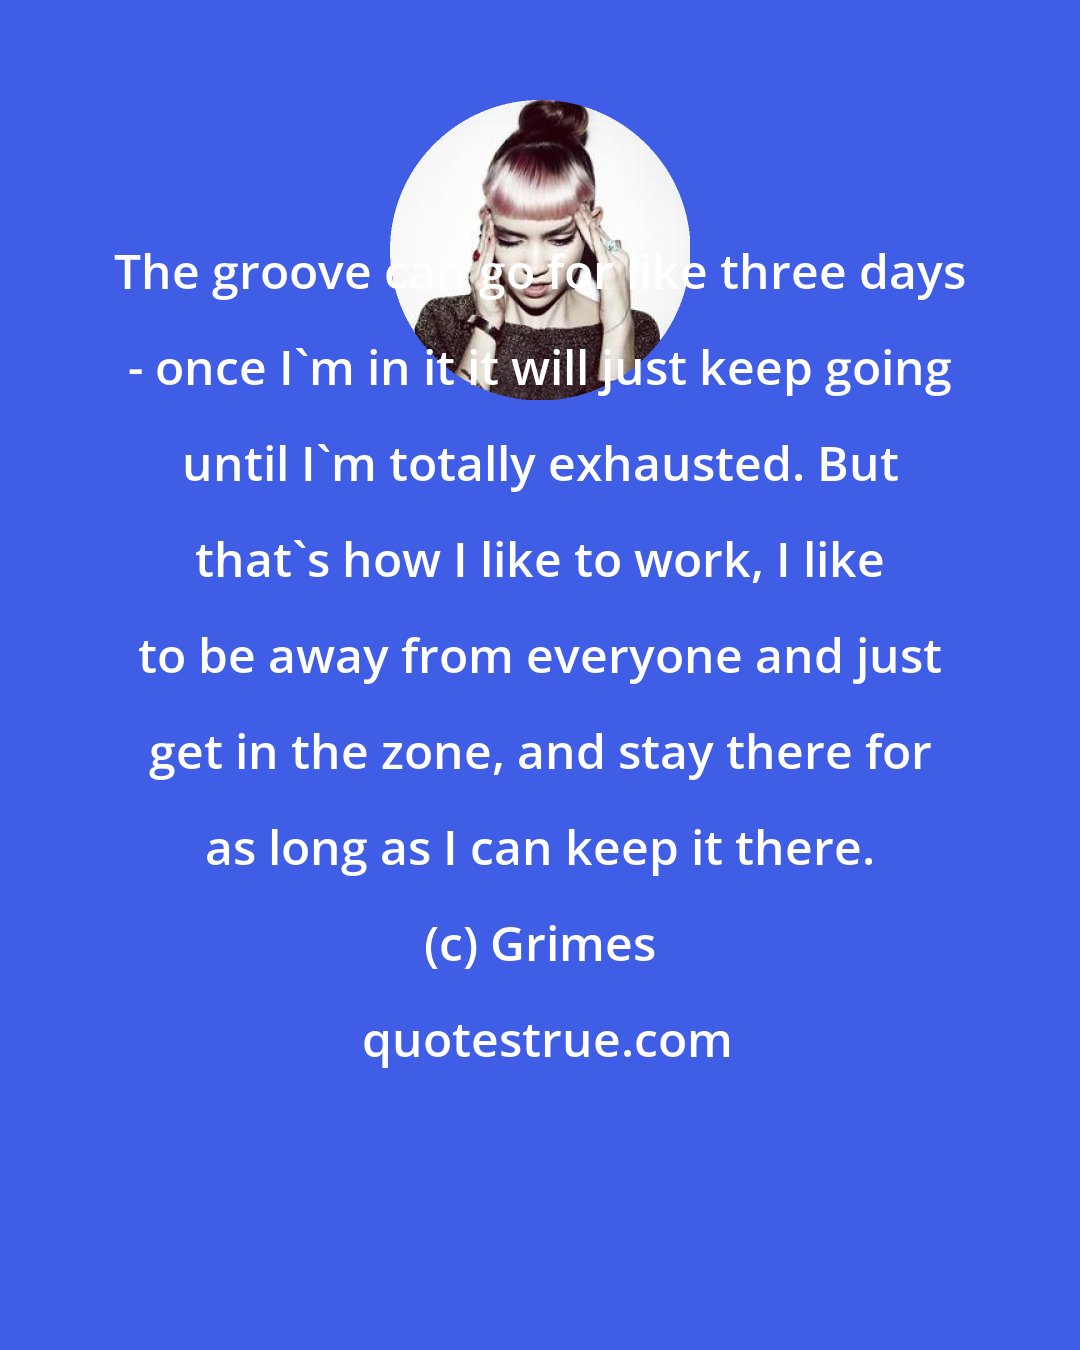 Grimes: The groove can go for like three days - once I'm in it it will just keep going until I'm totally exhausted. But that's how I like to work, I like to be away from everyone and just get in the zone, and stay there for as long as I can keep it there.